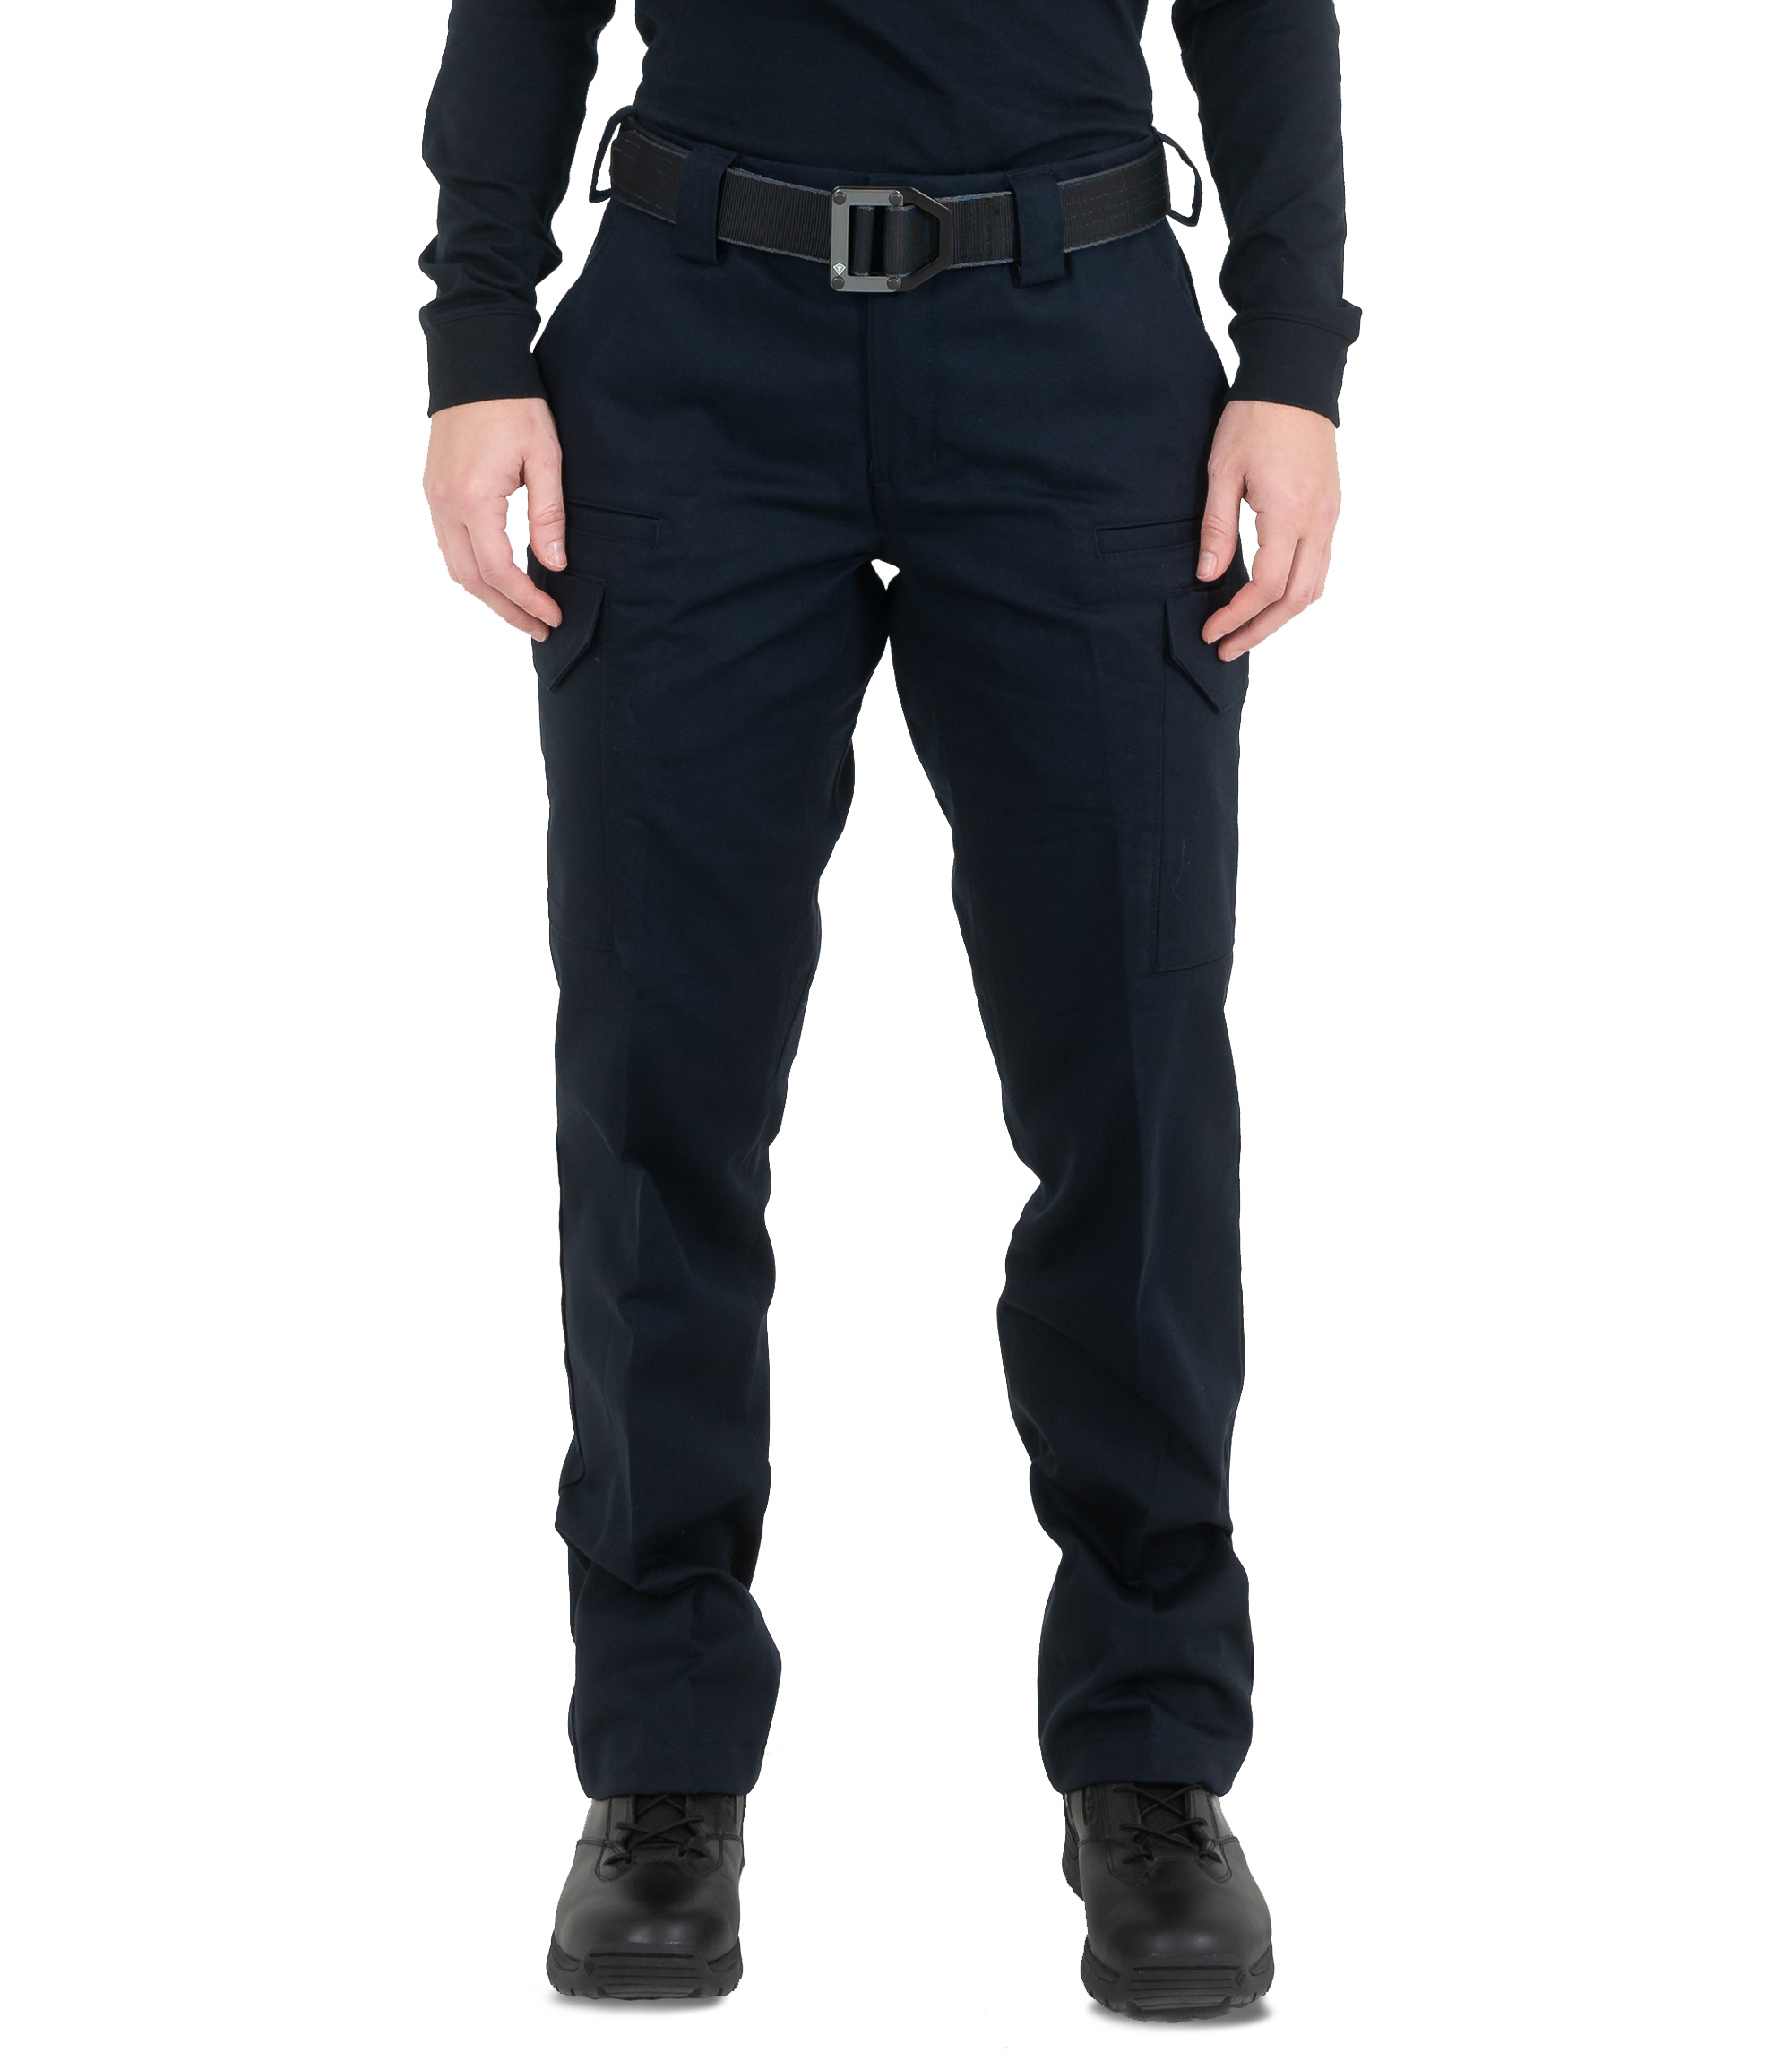 First Tactical Women's Cargo Cotton Station Pant - Midnight Navy